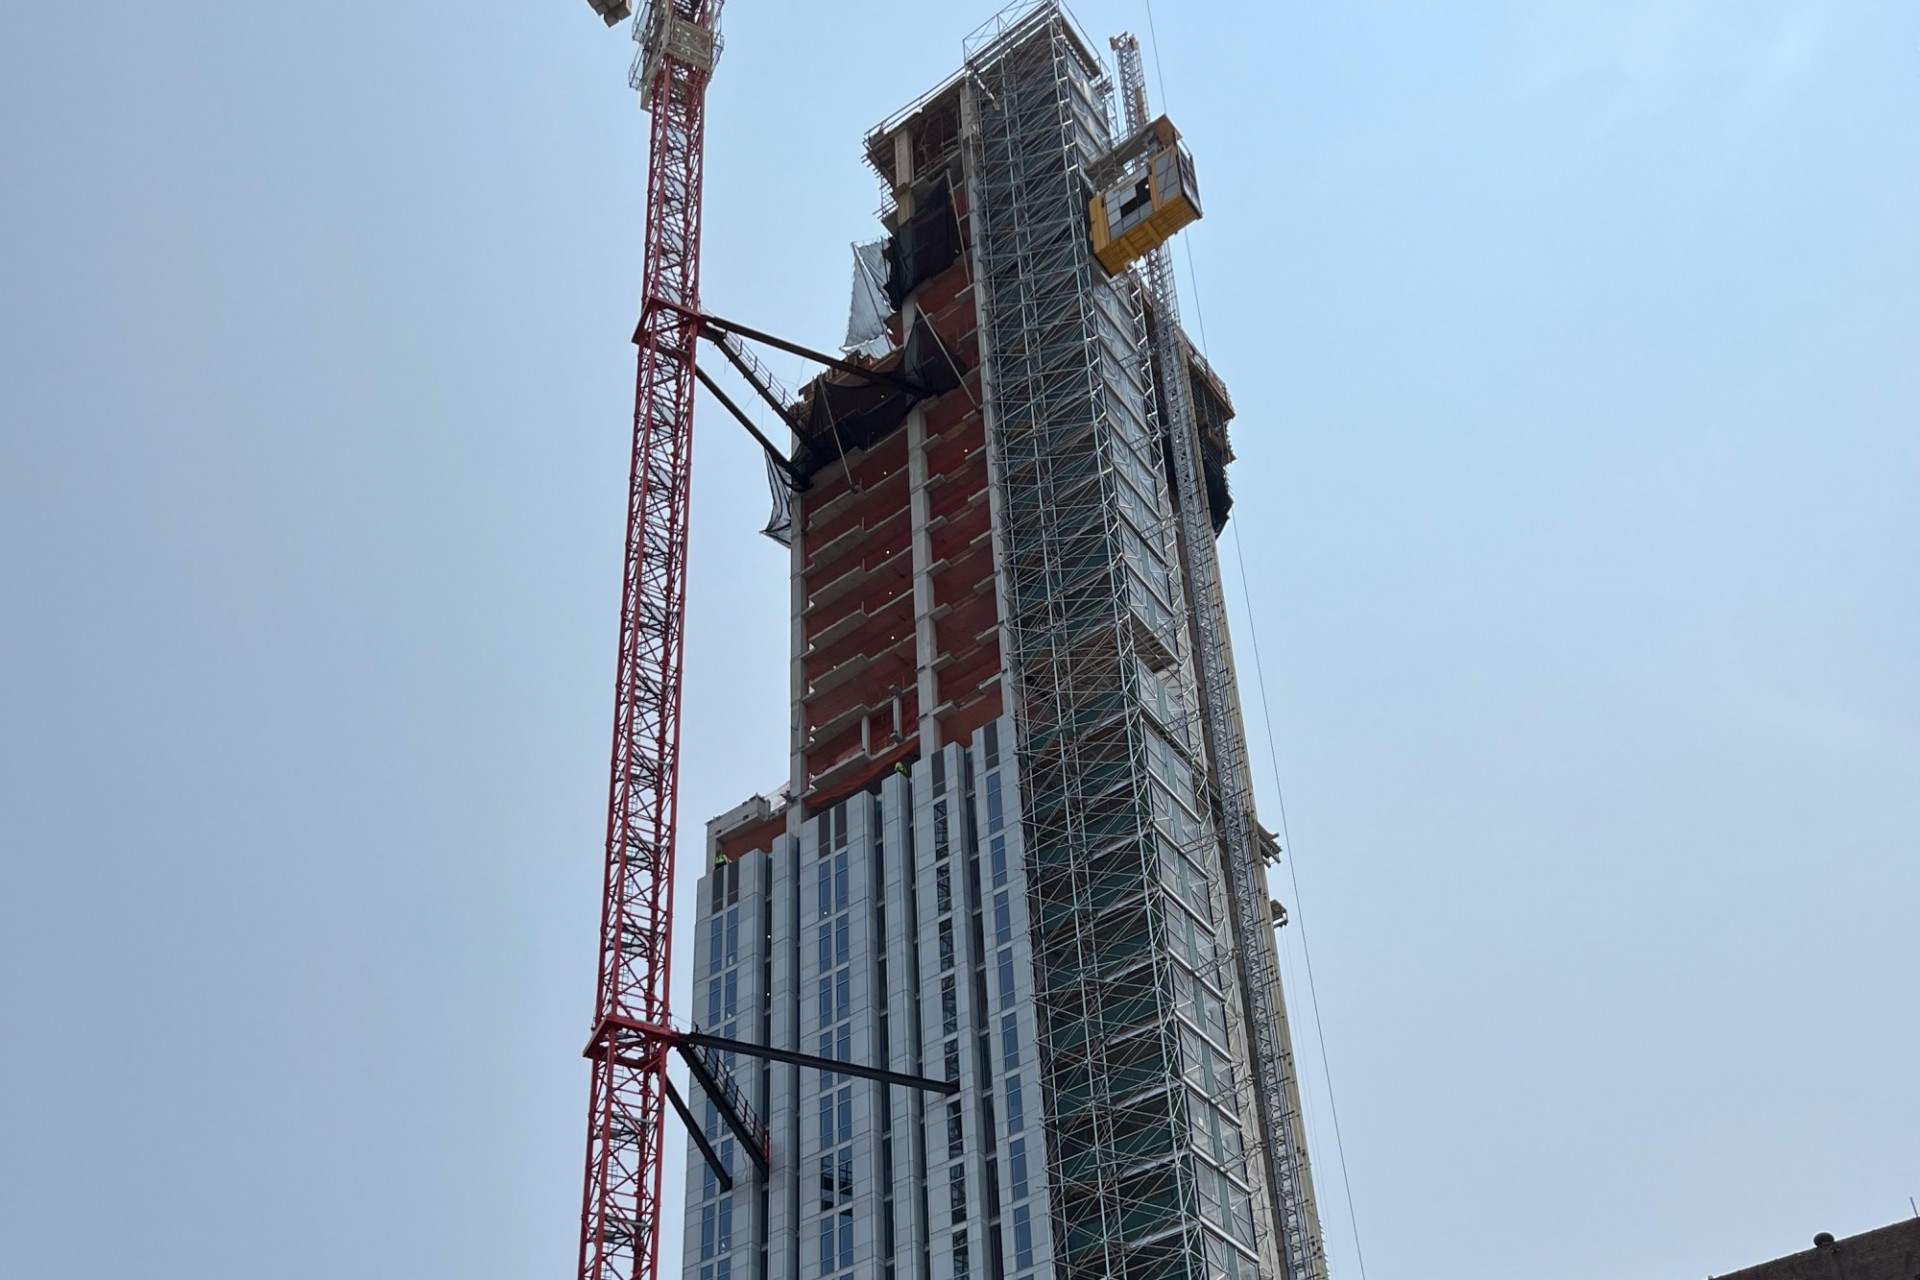 A view of the 600 W. 125th Street construction site which is 34 floors high, and has some facade panels installed around it. 